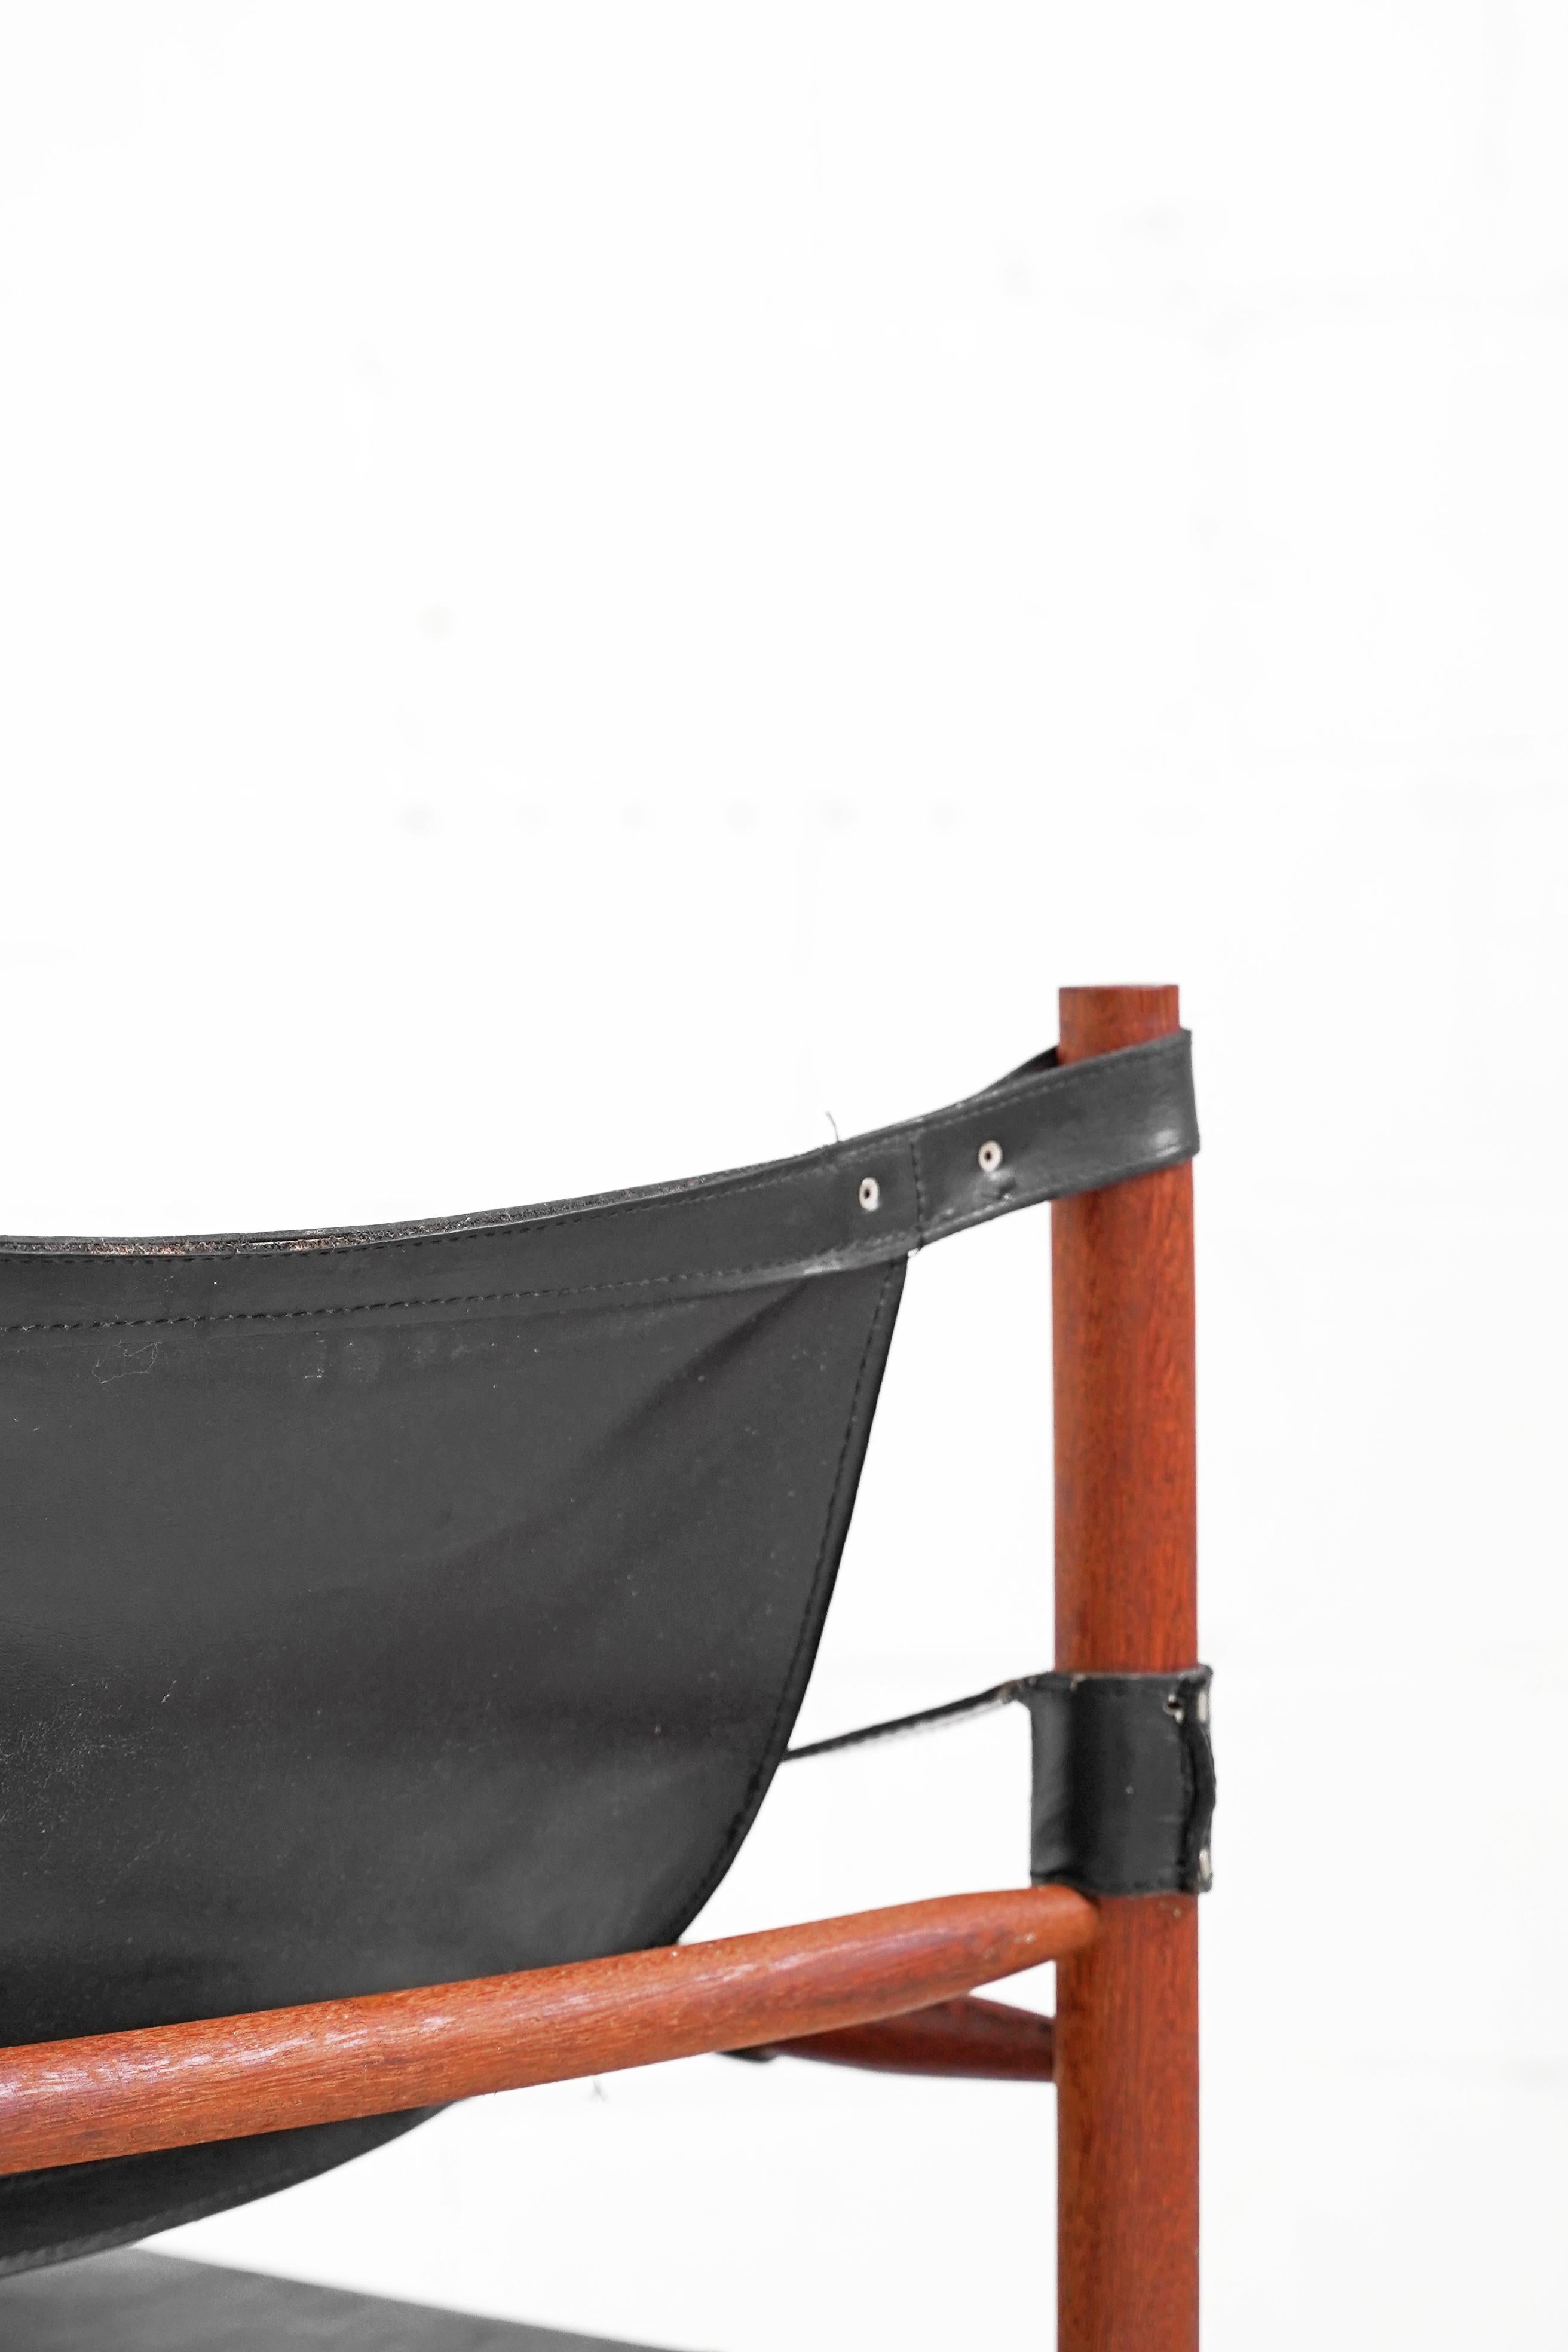 Teak Black Leather Safari Sling Chair in the style of Arne Norell for Norells AB